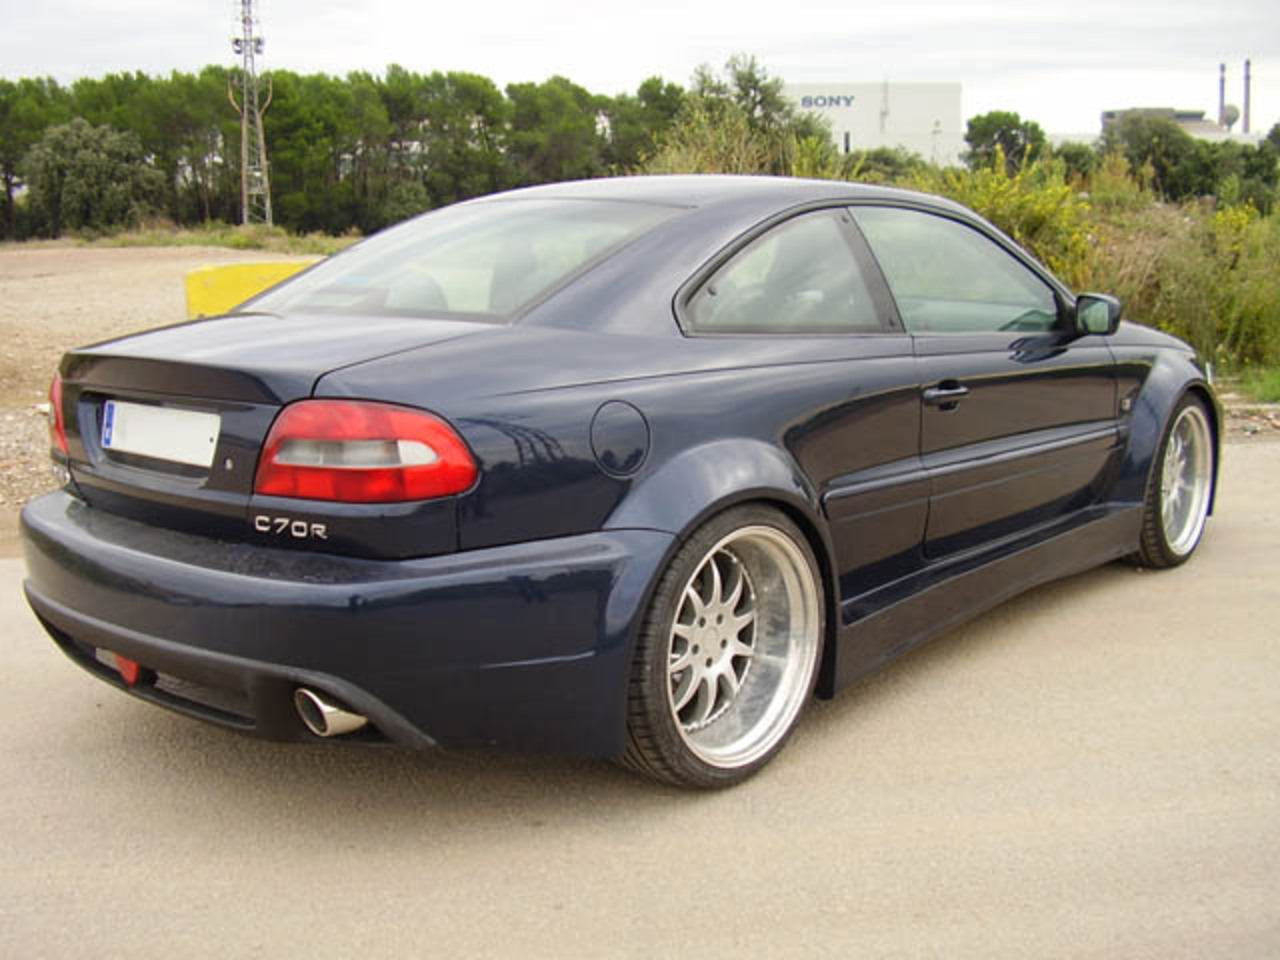 Volvo C70 R. View Download Wallpaper. 640x480. Comments